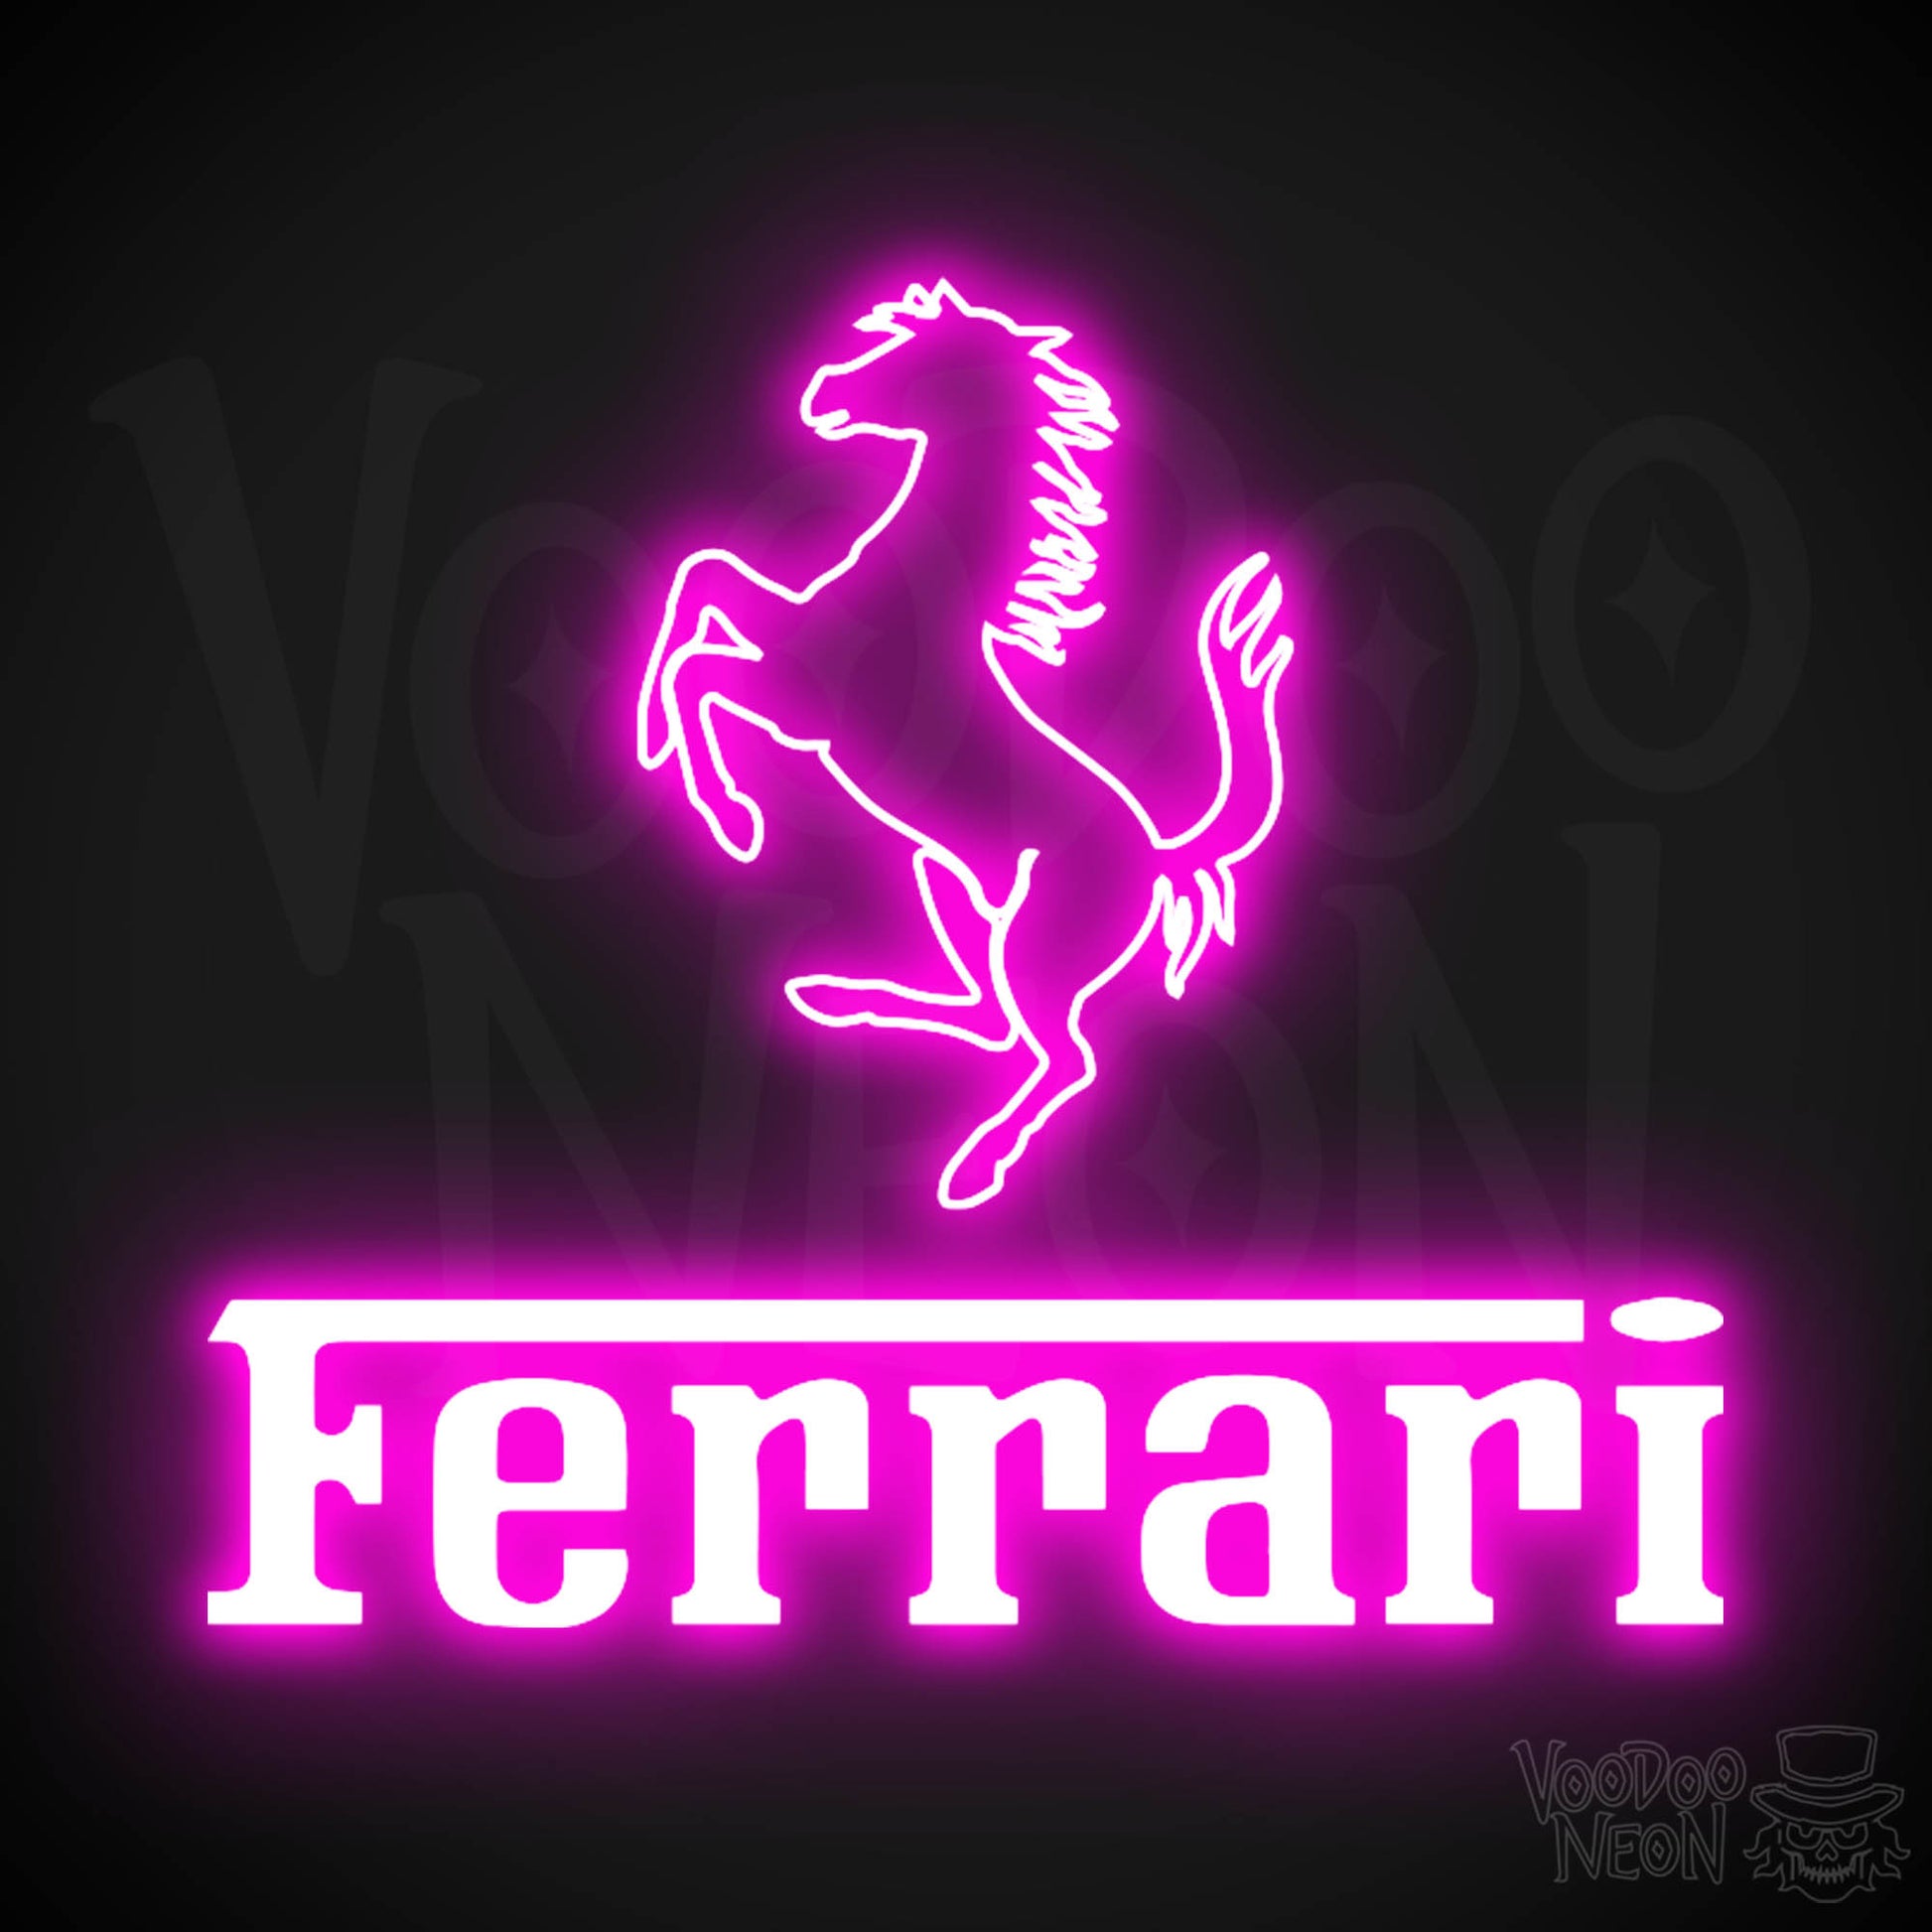 Ferrari Neon Sign - Neon Ferrari Sign - Ferrari Logo Wall Art - Color Pink